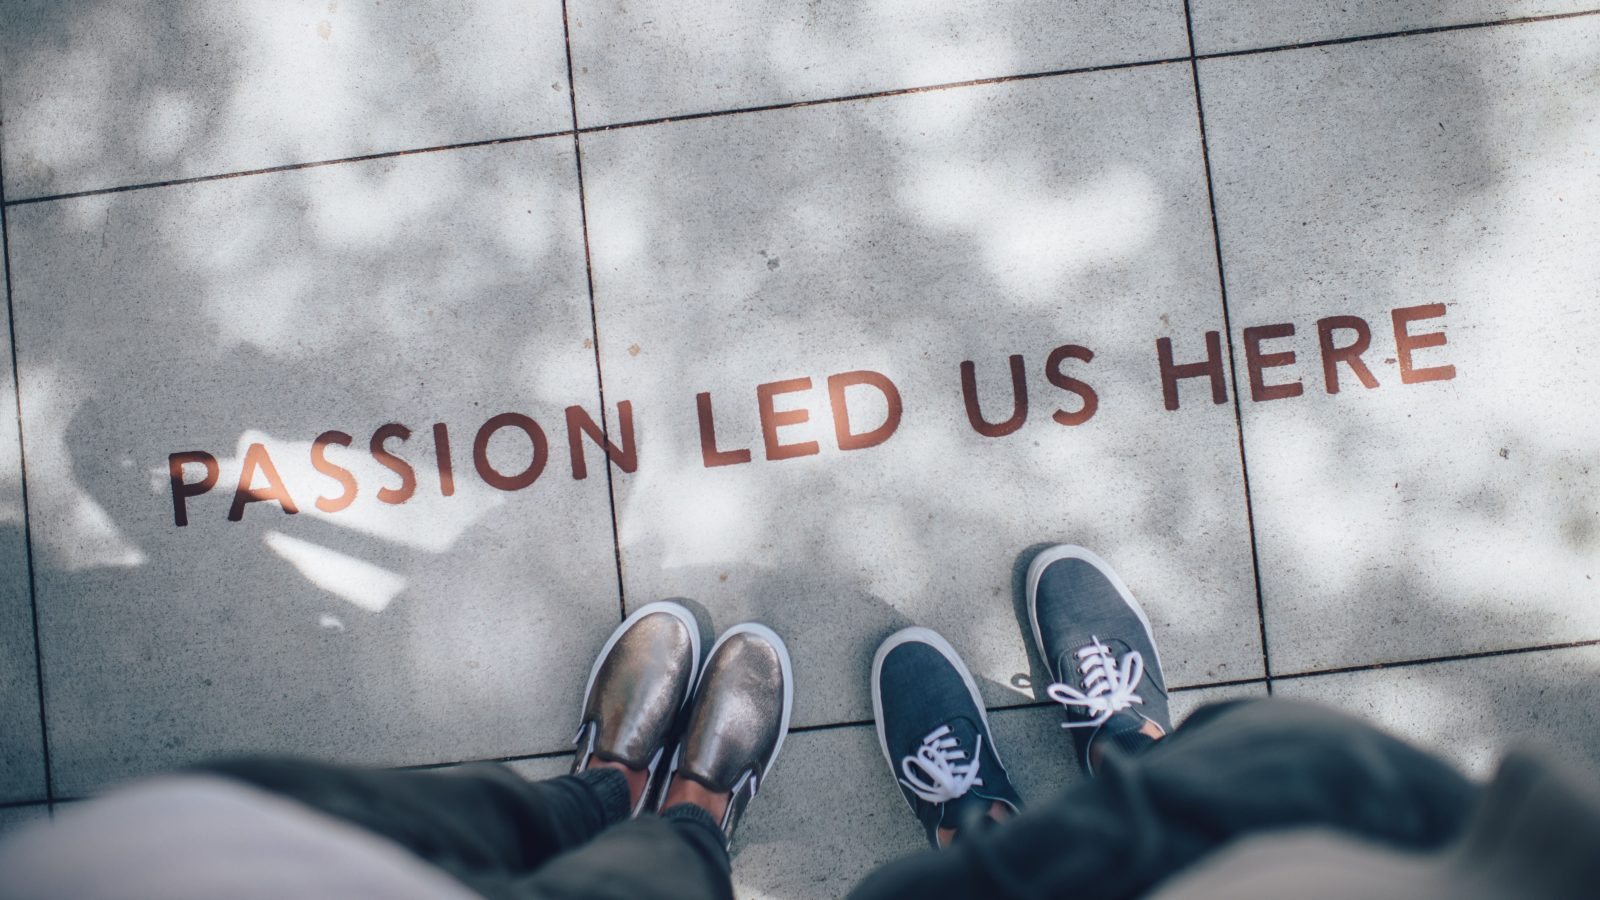 two people's shoes standing on the sidewalk next to the phrase "passion led us here"